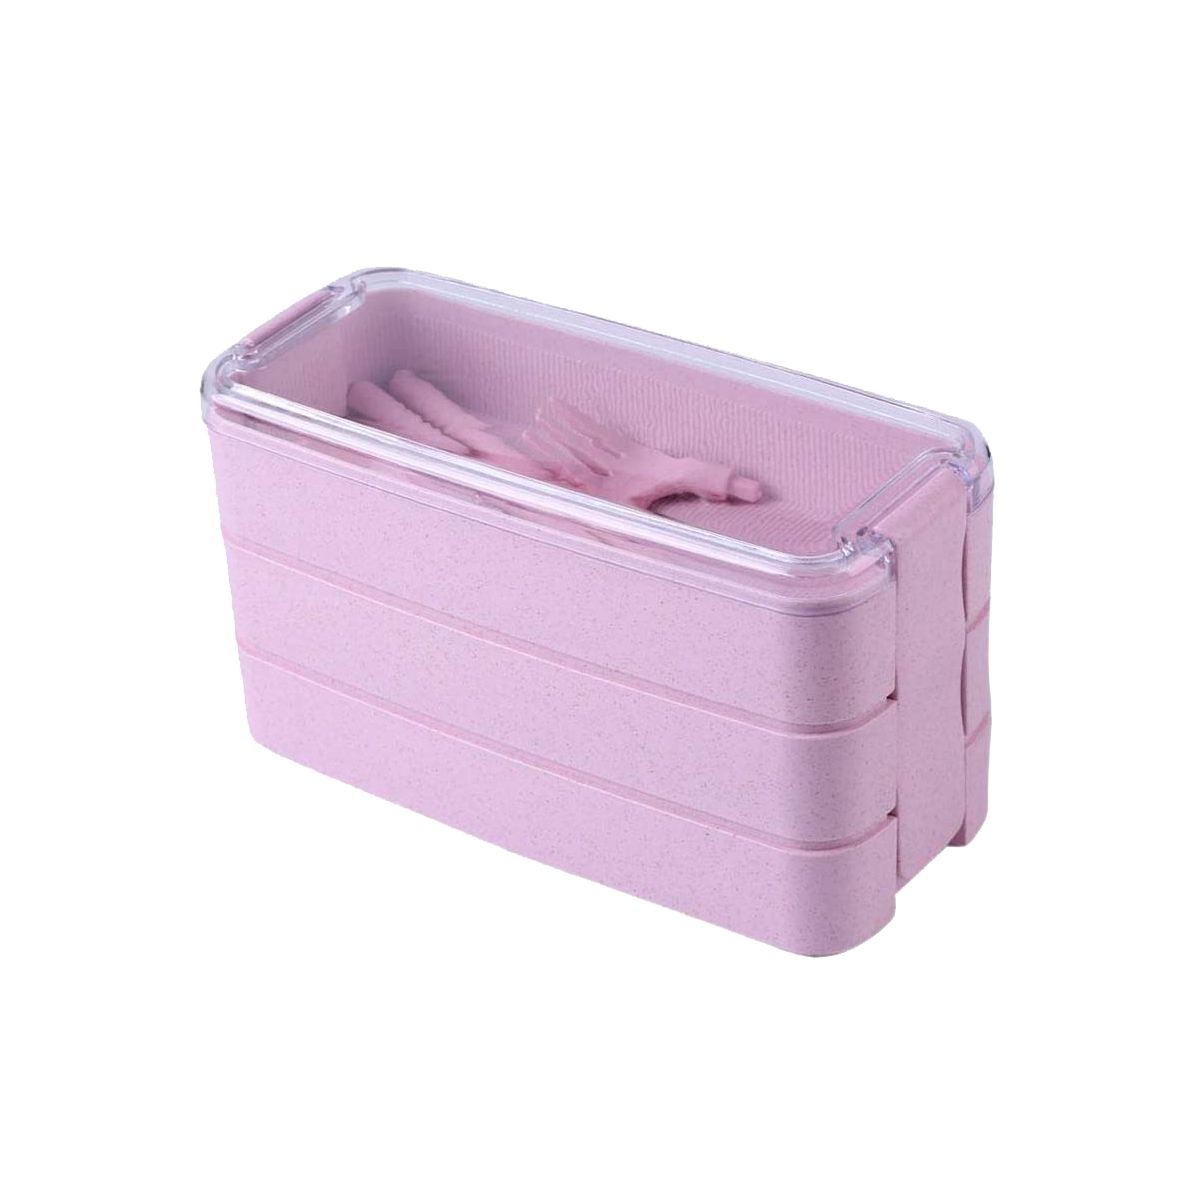 50468-04-bento-lunch-box-pink